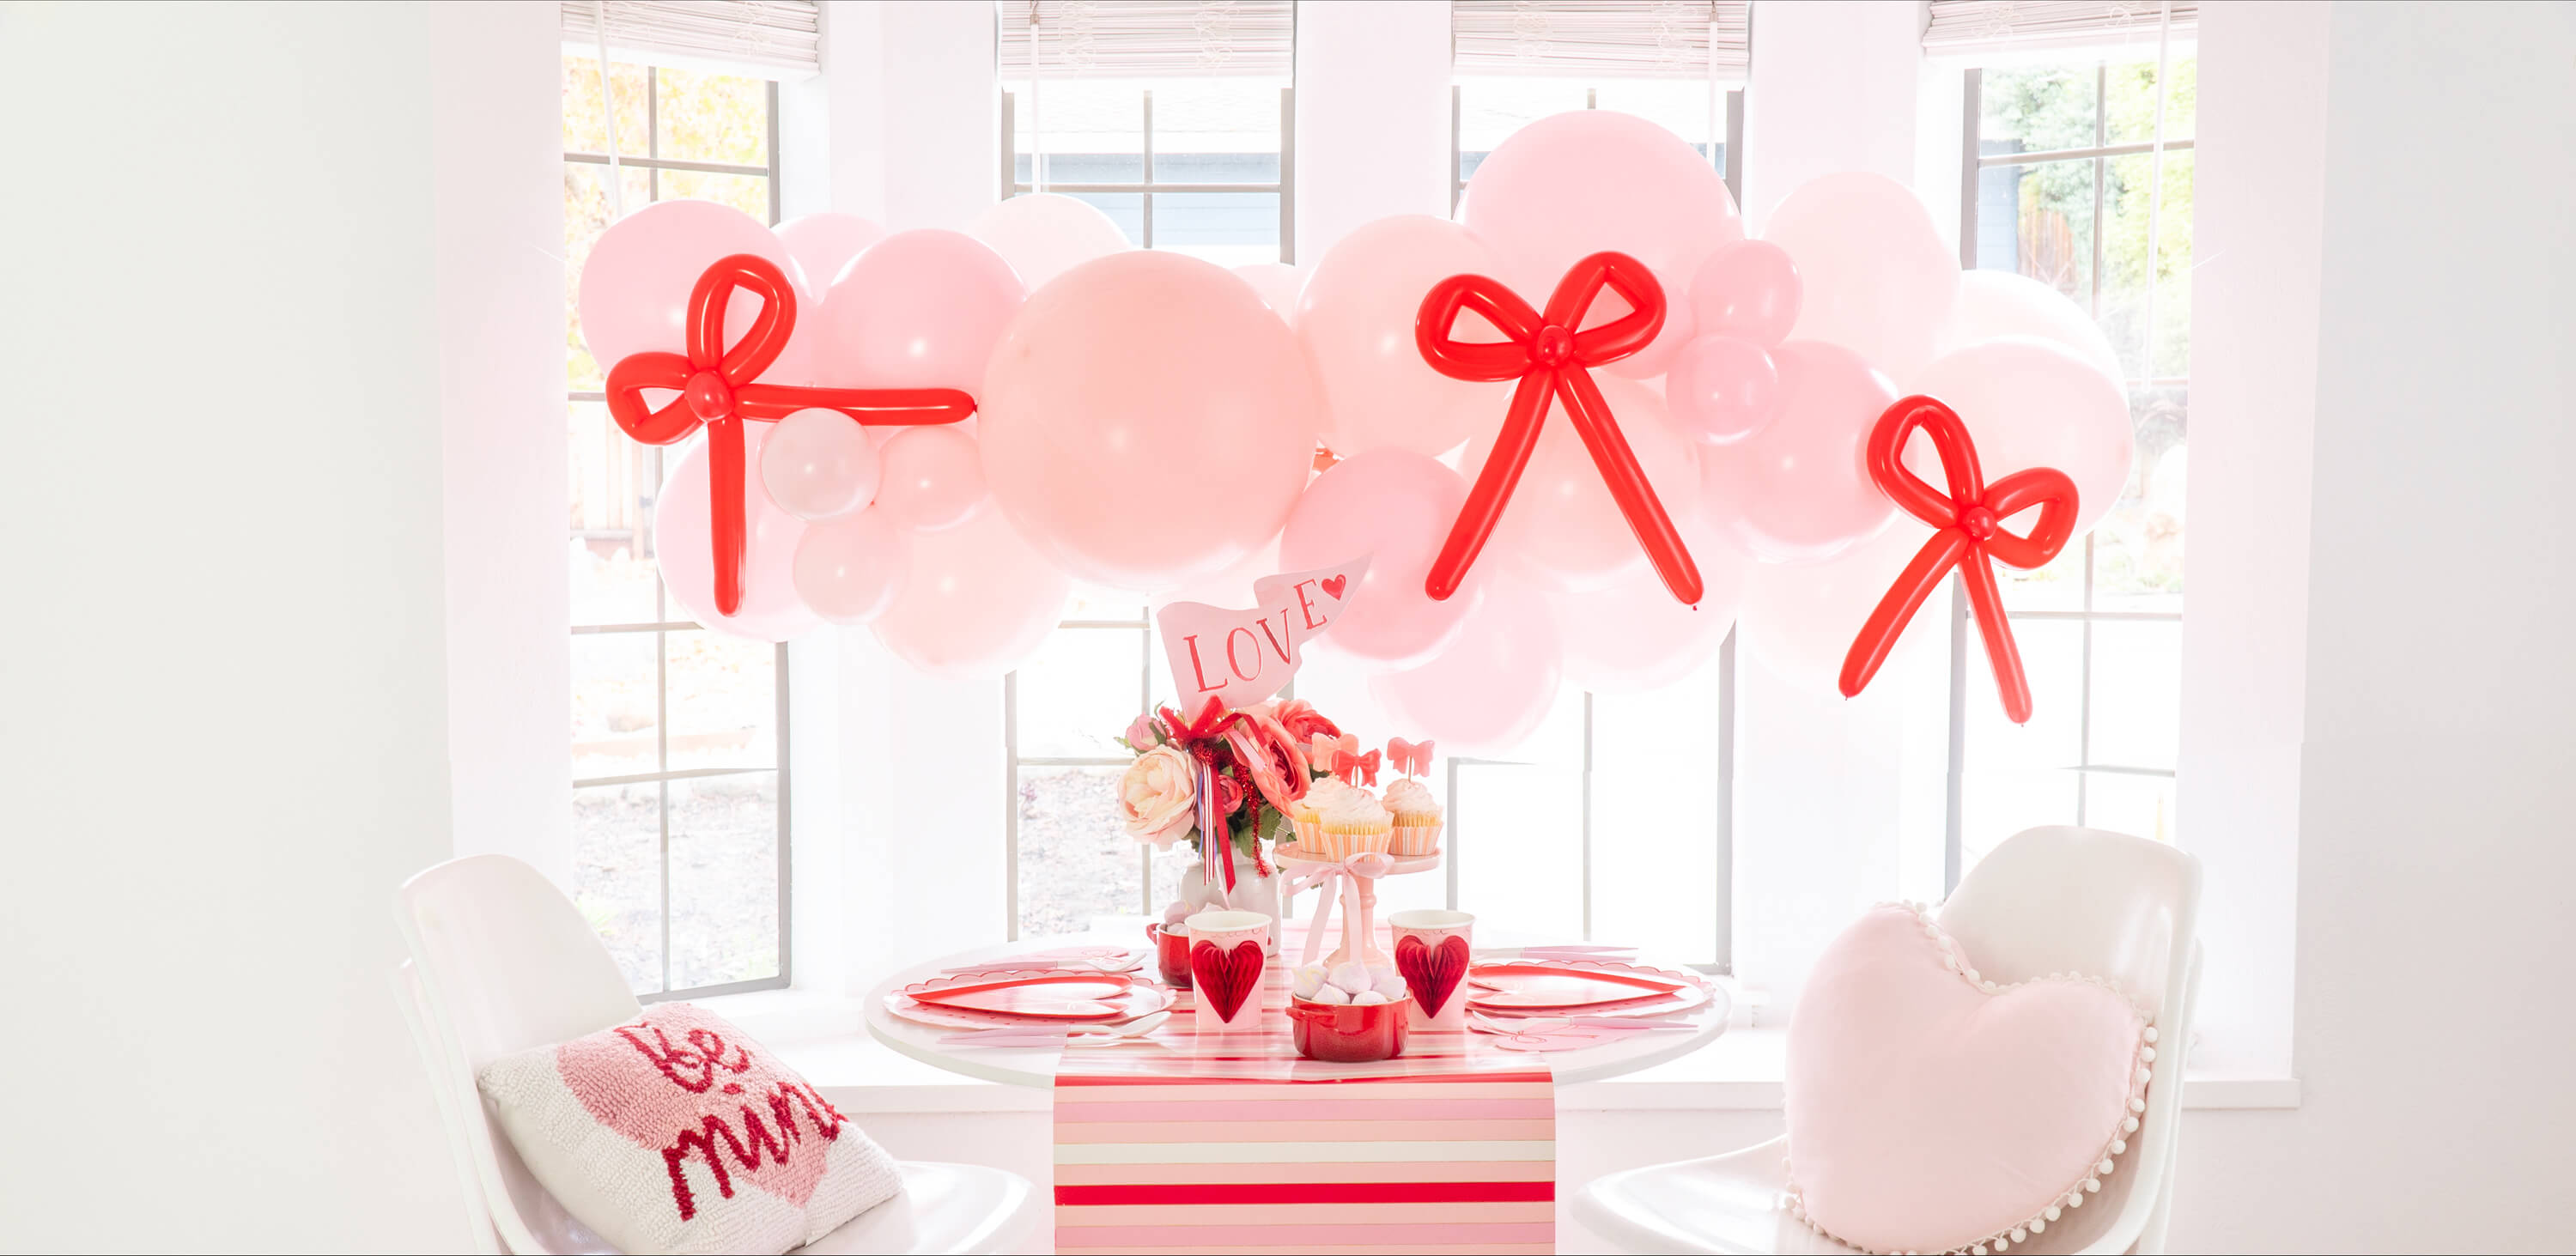 Tying the Knot of Love: A Bow-Themed Valentine's Day Party Set up by Momo Party. What a cute idea for your Valentine's celebration or Galentine's Day with your besties